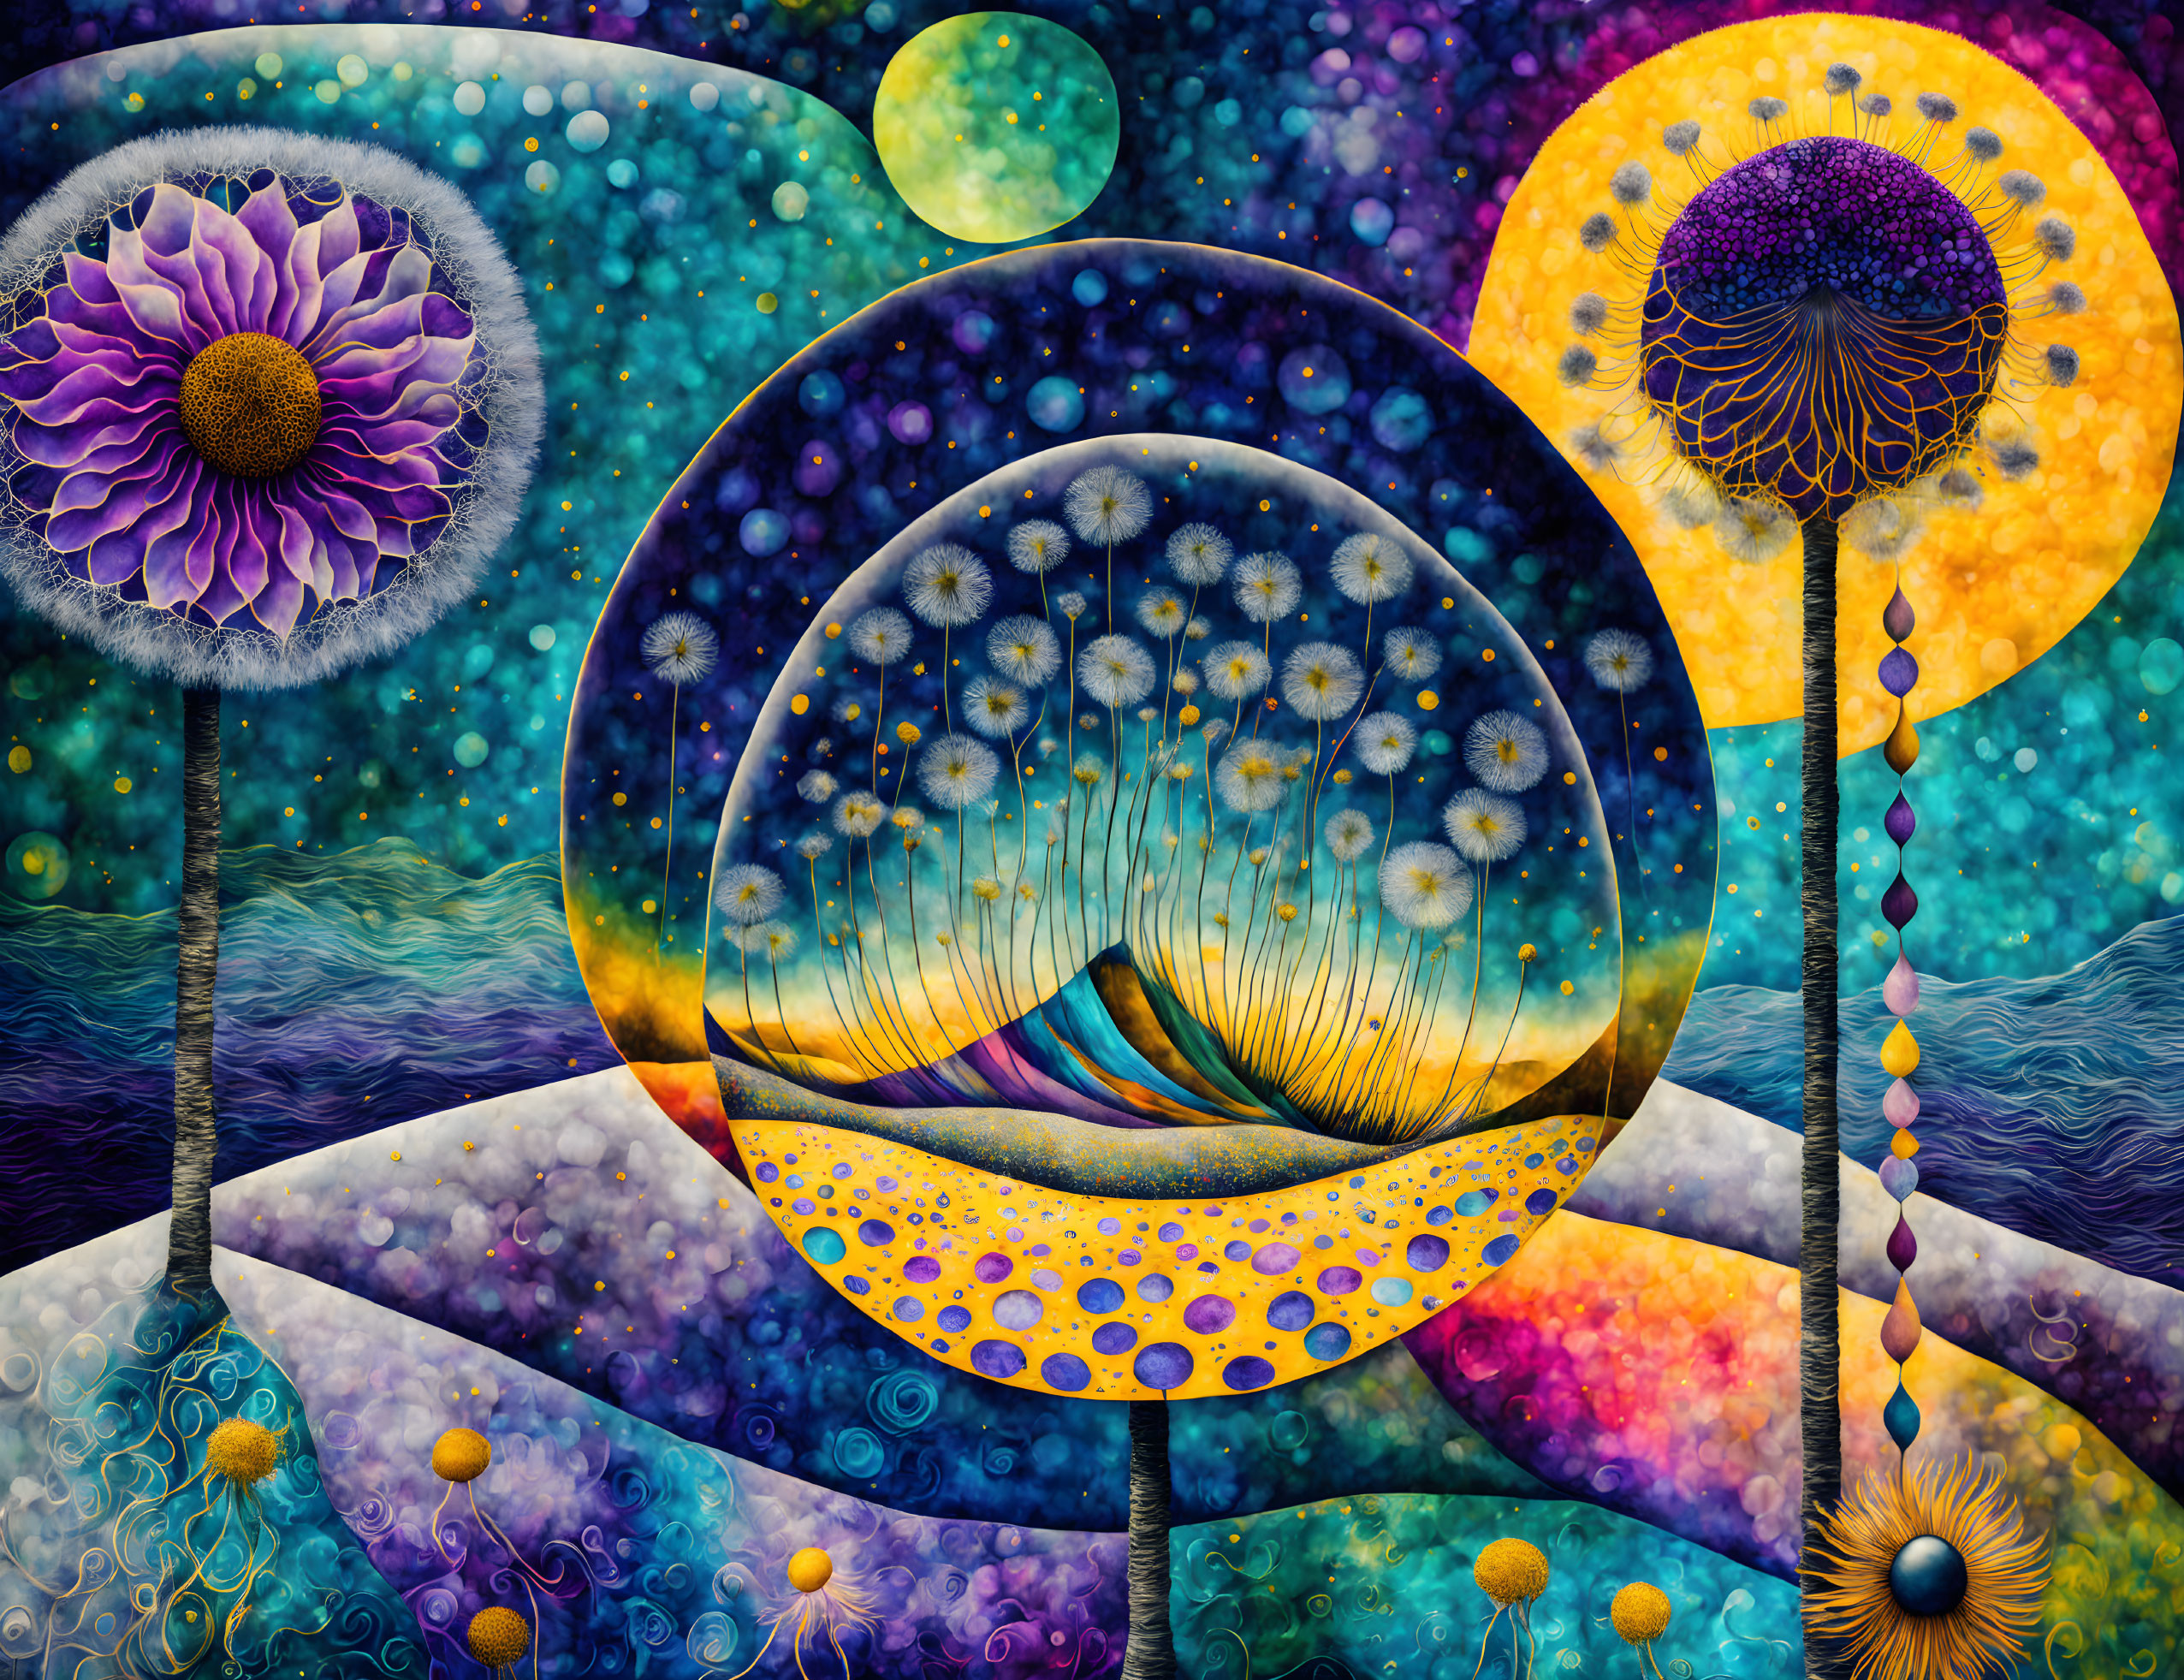 Colorful Psychedelic Artwork with Floral and Cosmic Themes